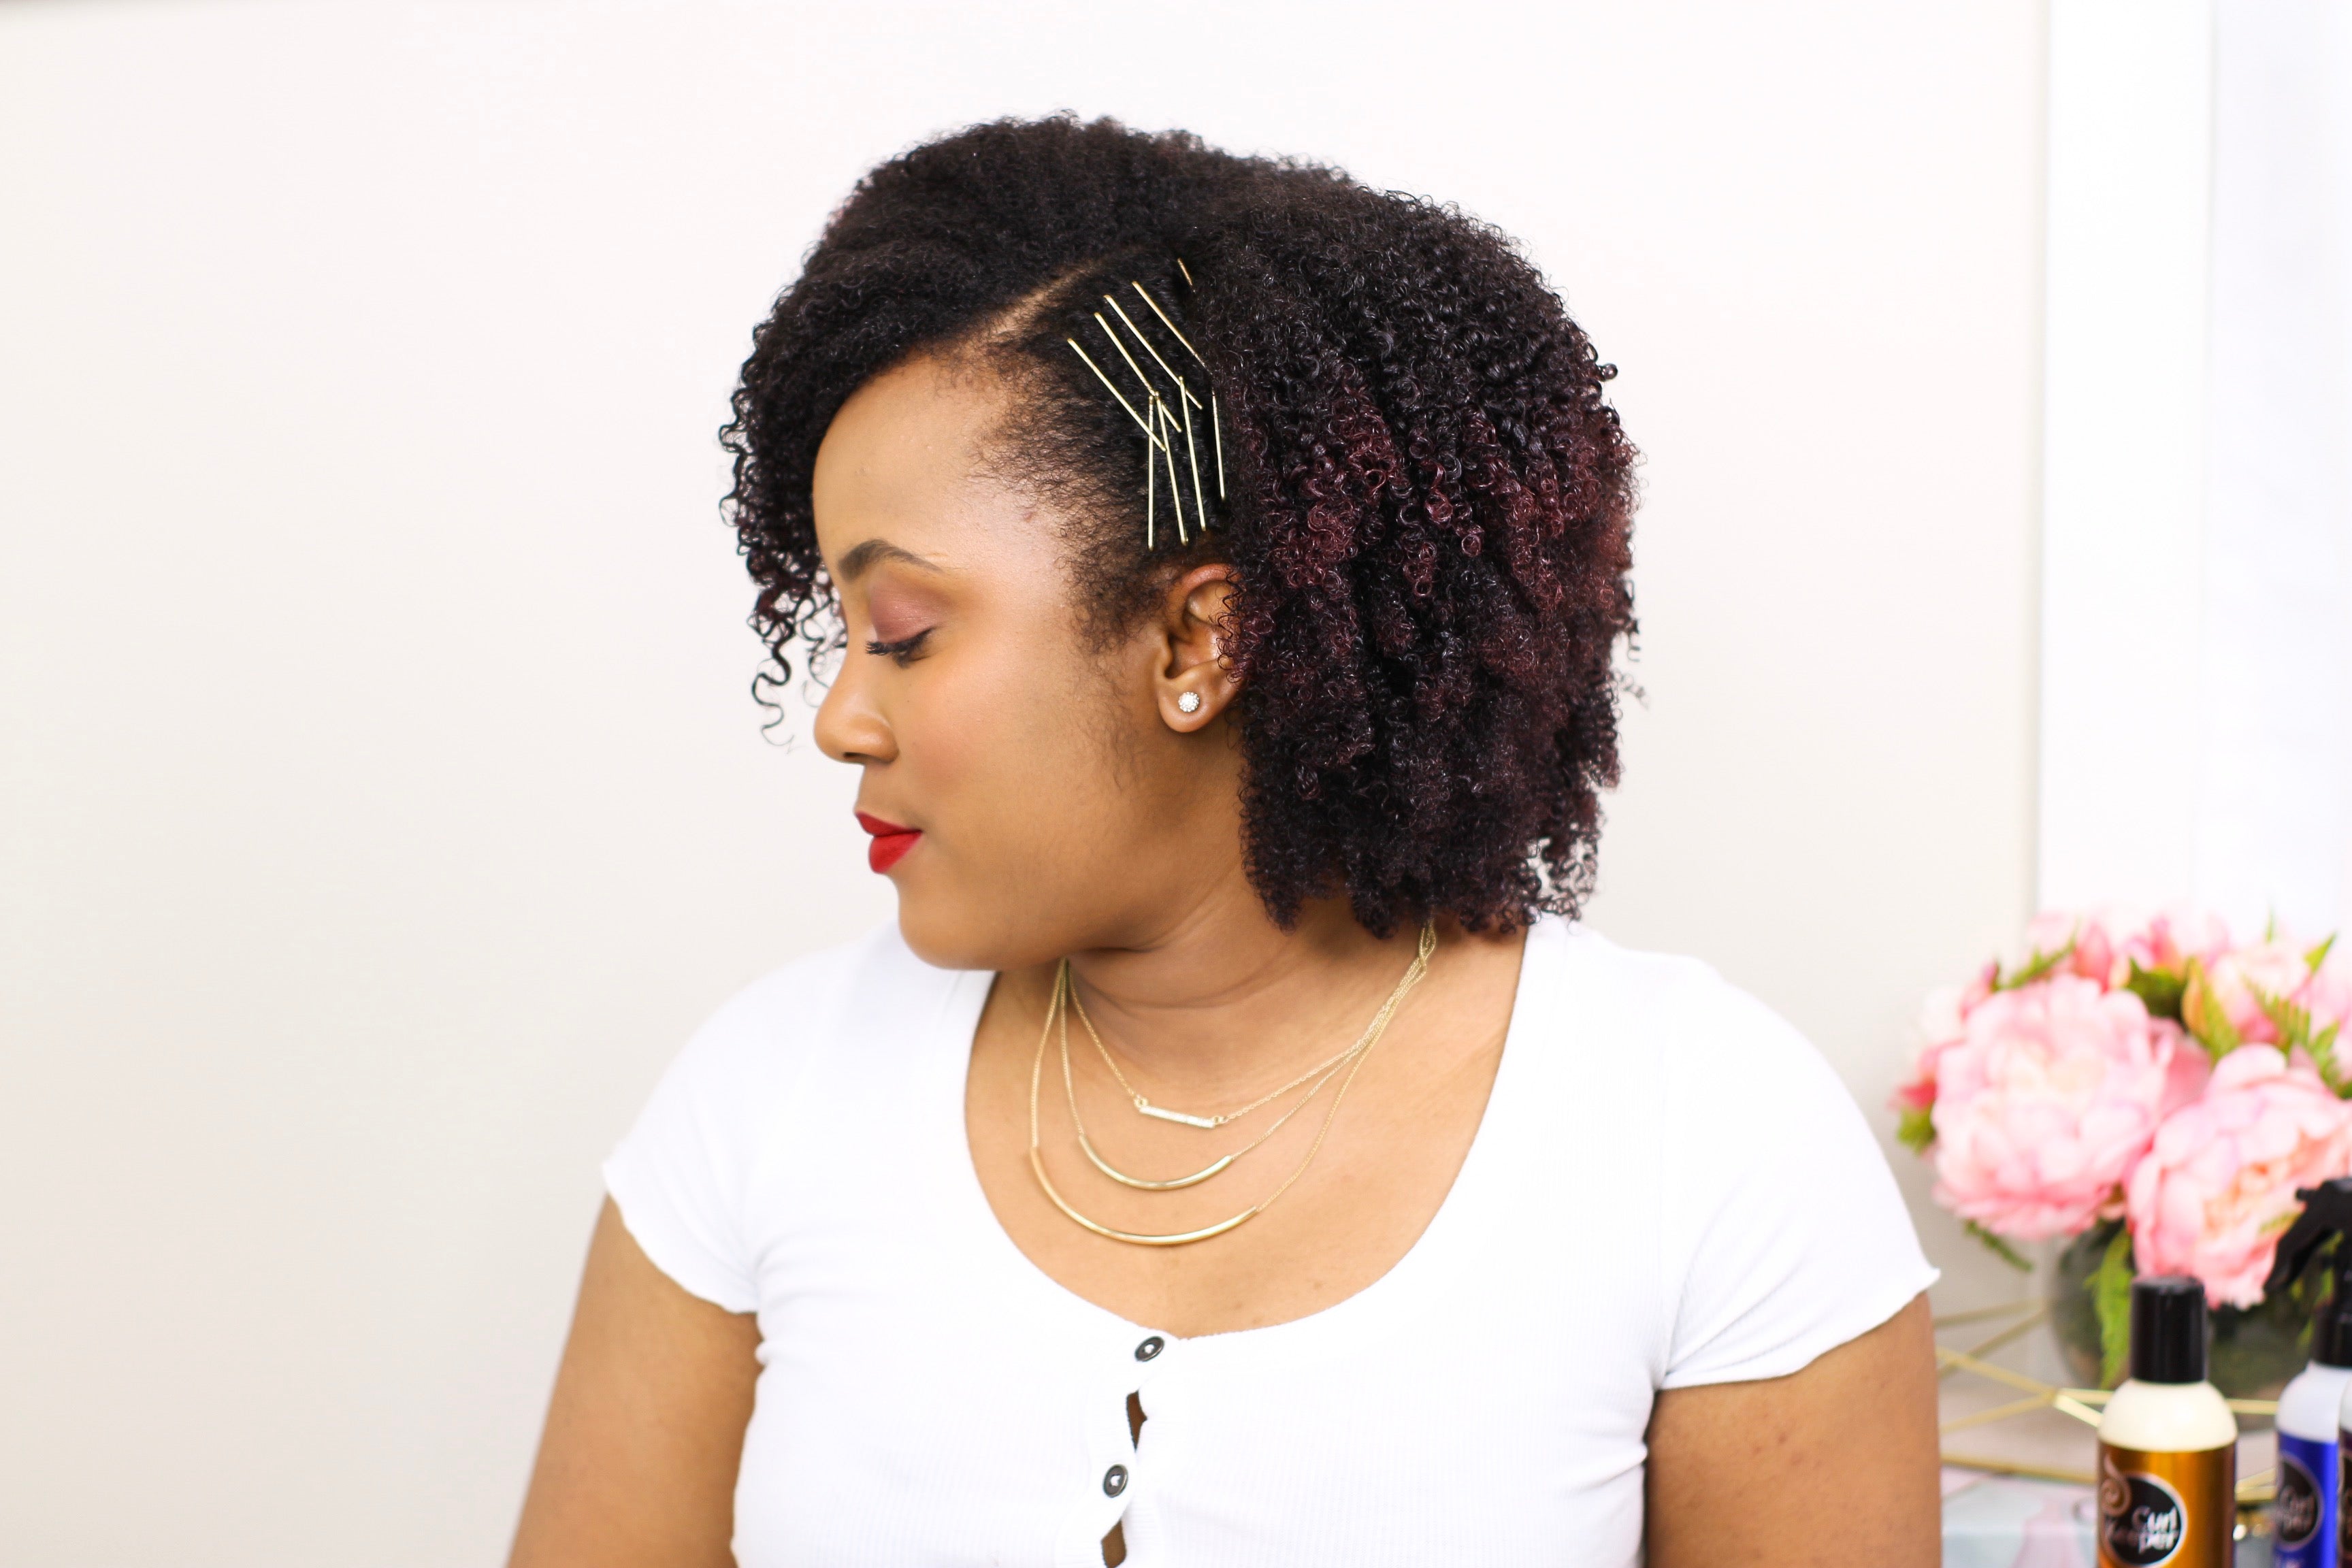 How to Rock Short, Curly Hair with Style and Confidence